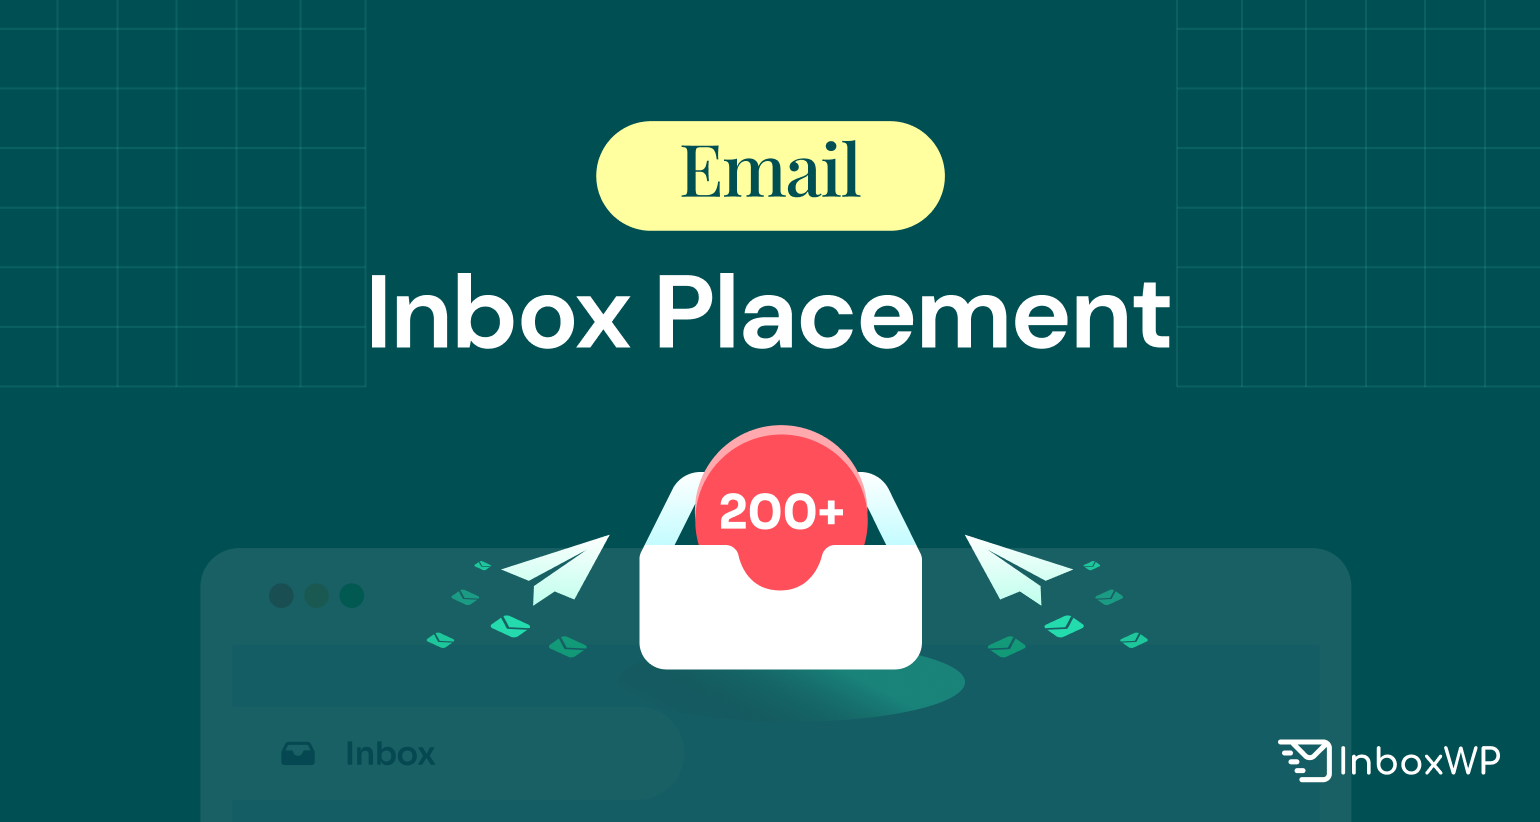 Email Inbox Placement